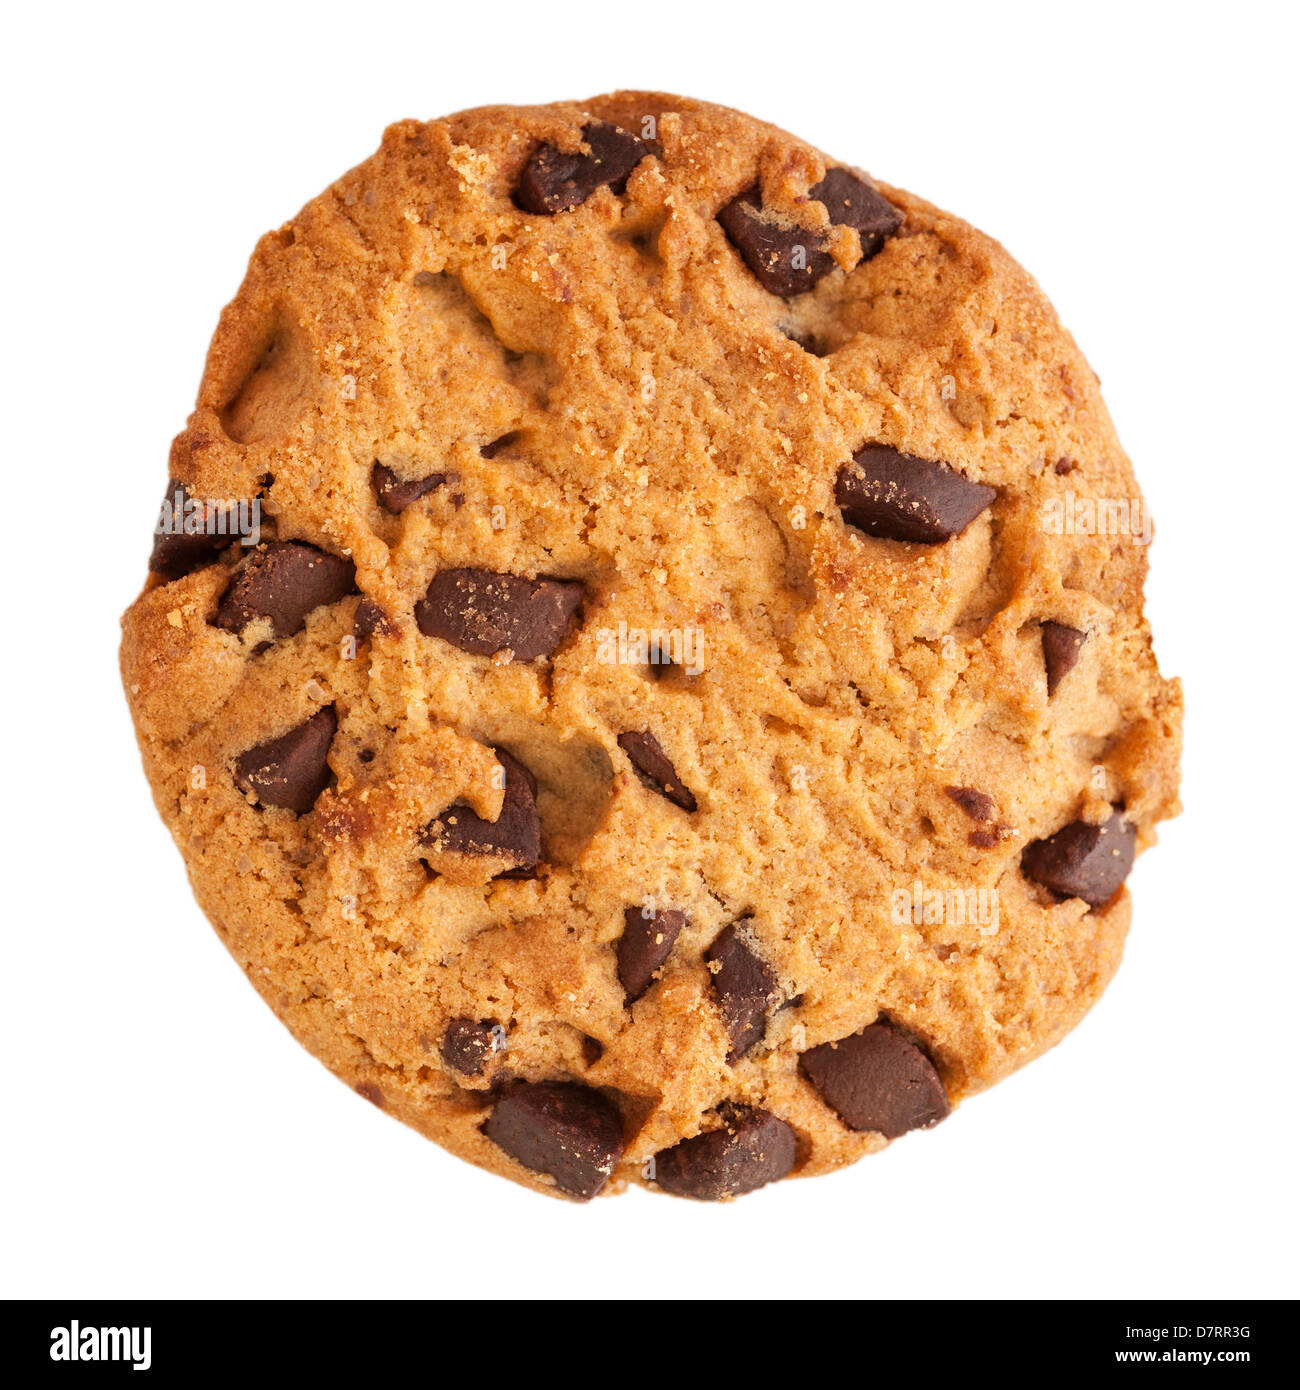 A chocolate choc chip cookie on a white background Stock Photo